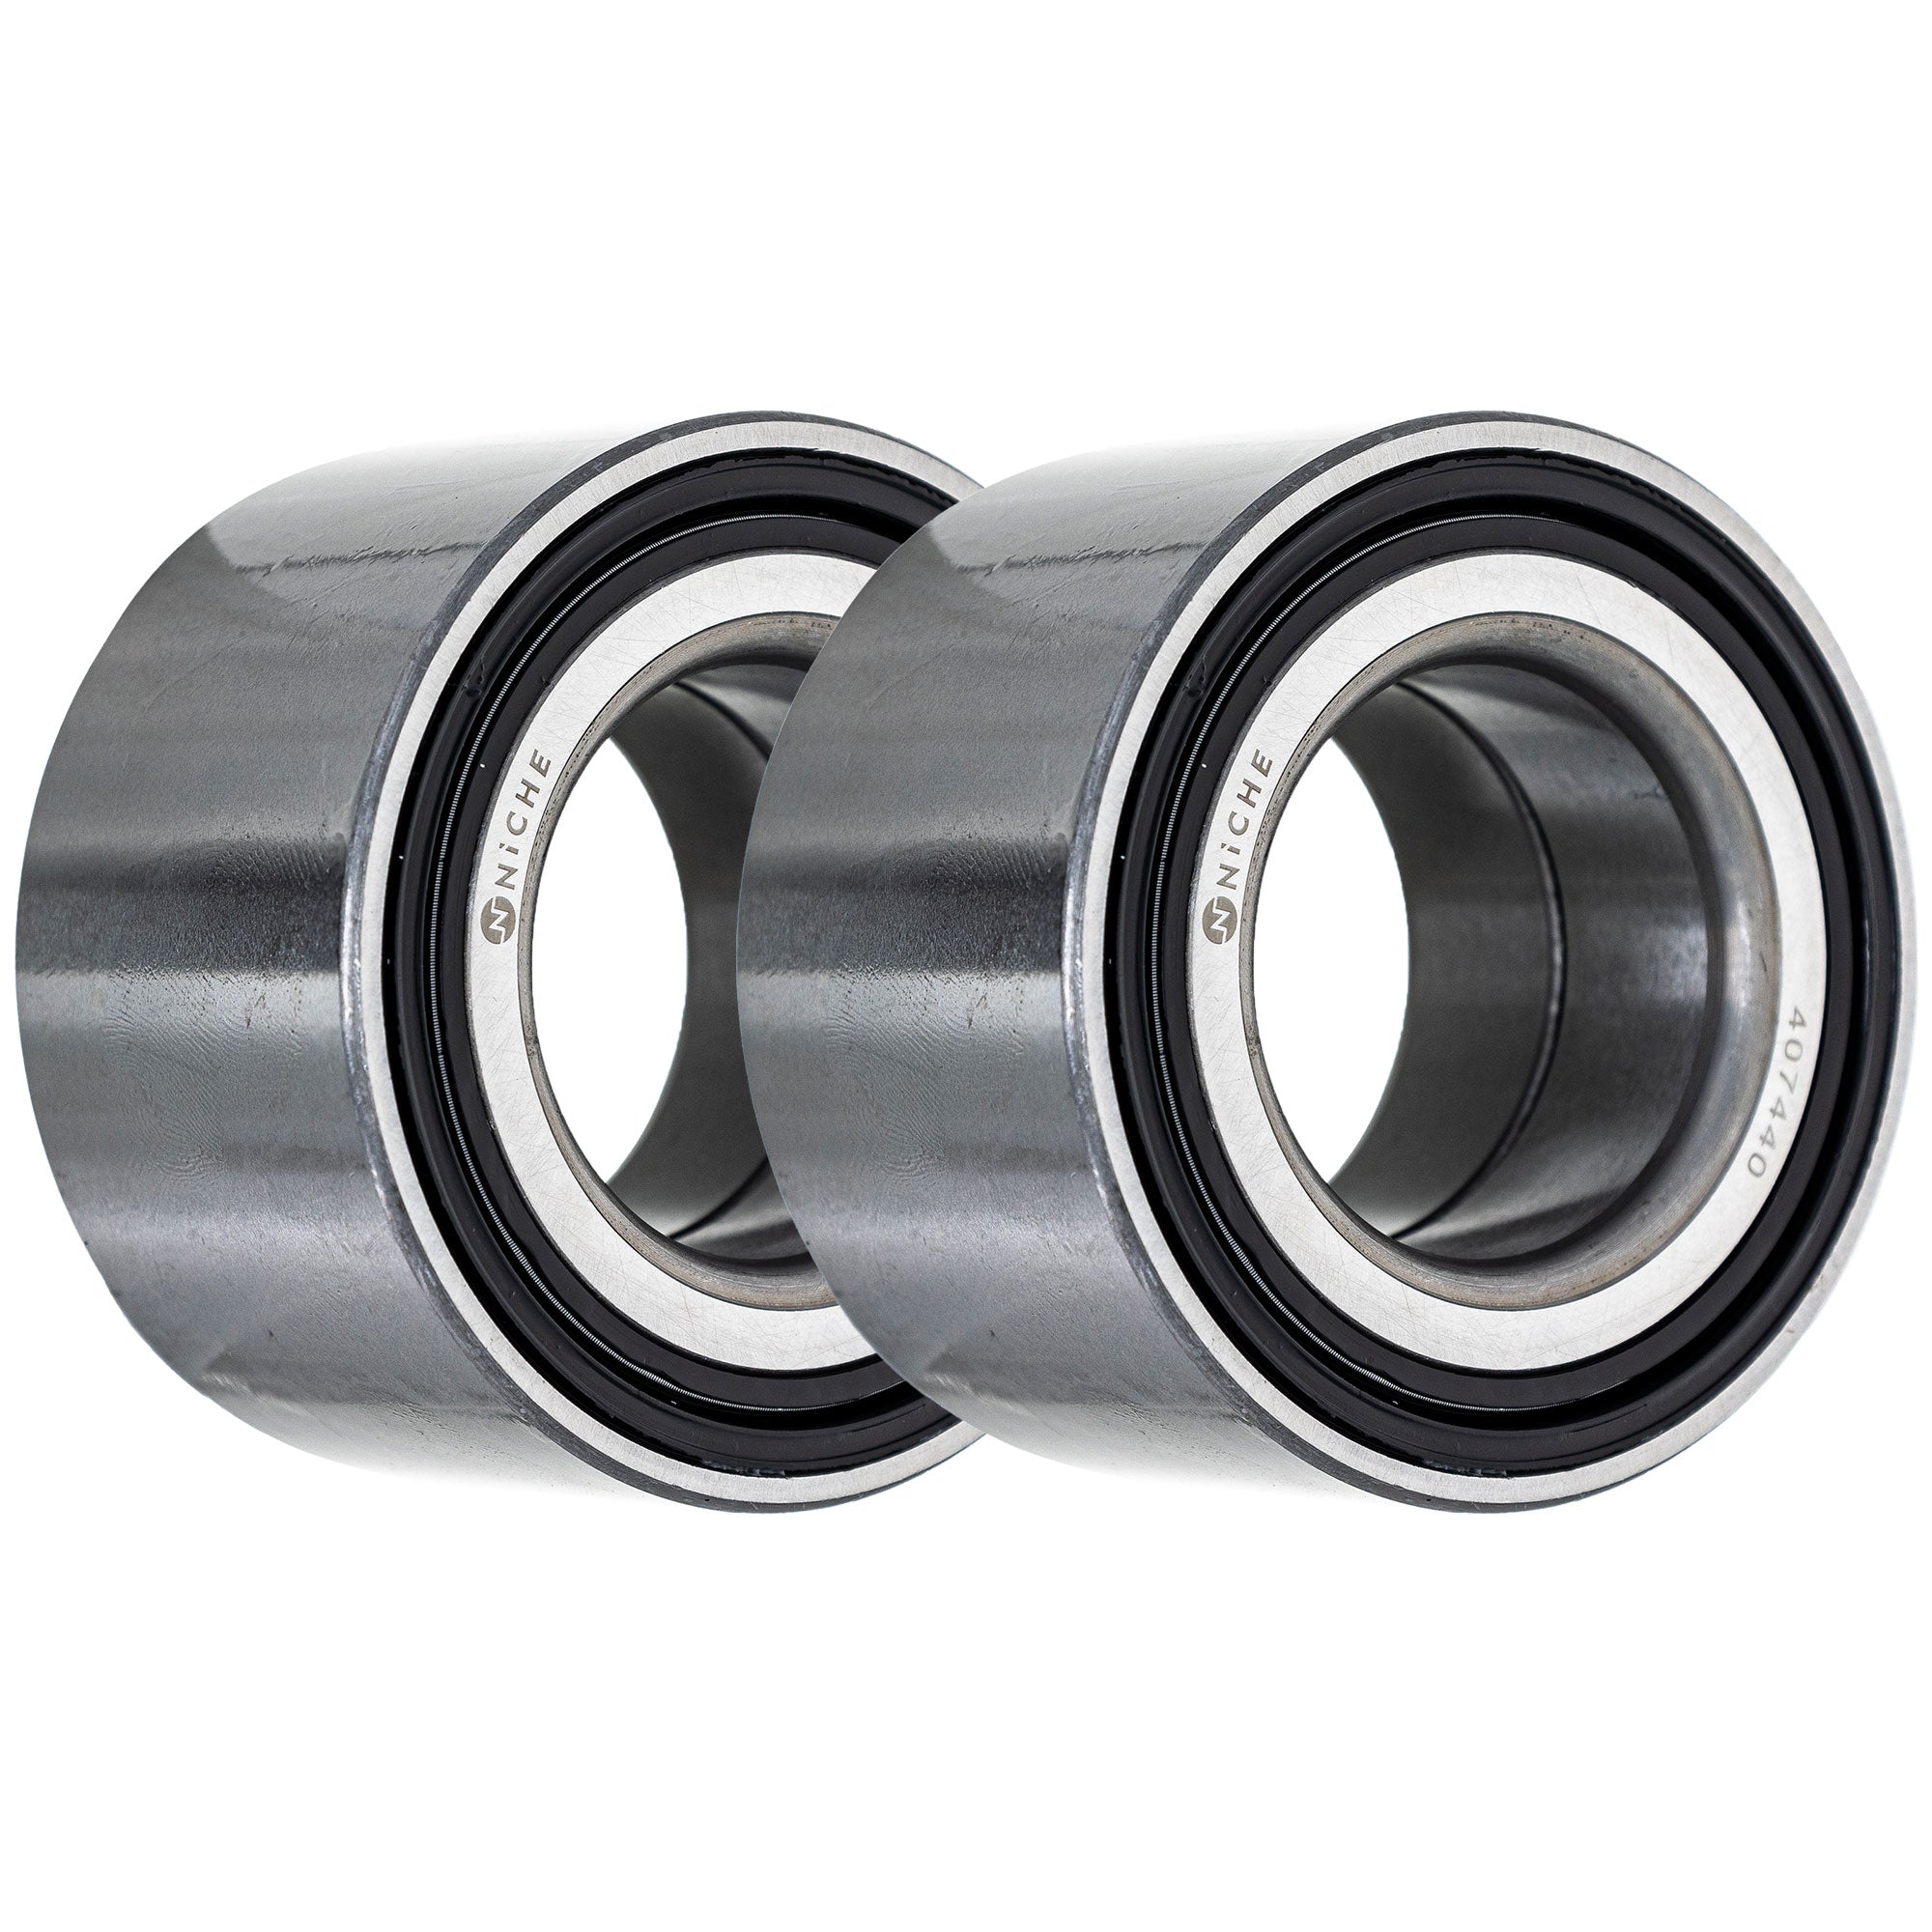 Double Row, Angular Contact, Ball Bearing Pack of 2 2-Pack for zOTHER GEM Stateline ST1300 NICHE 519-CBB2259R